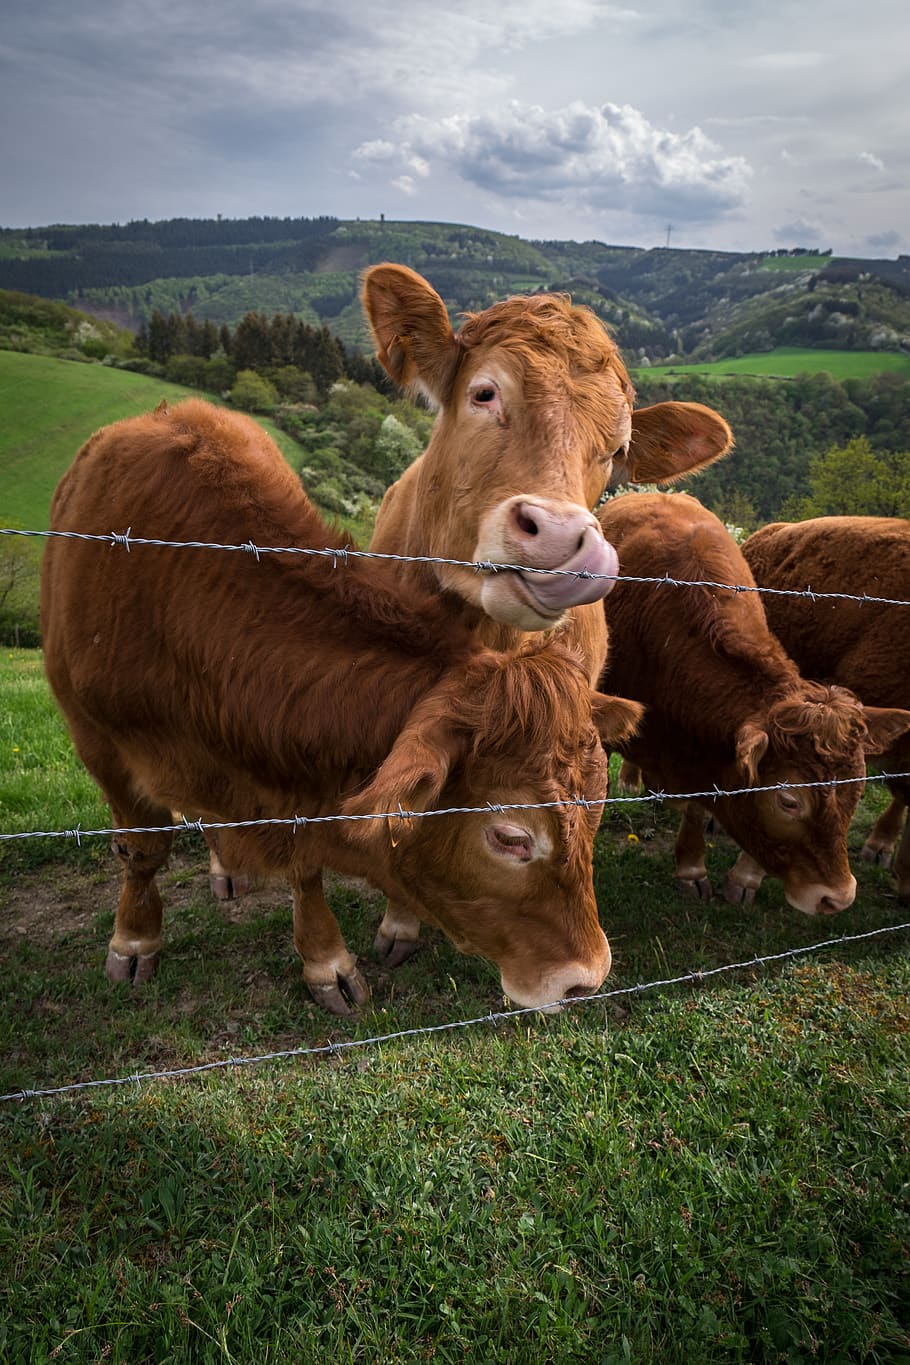 cattle, animal, farm, pasture, agriculture, nature, rural, grass, beef, mammal